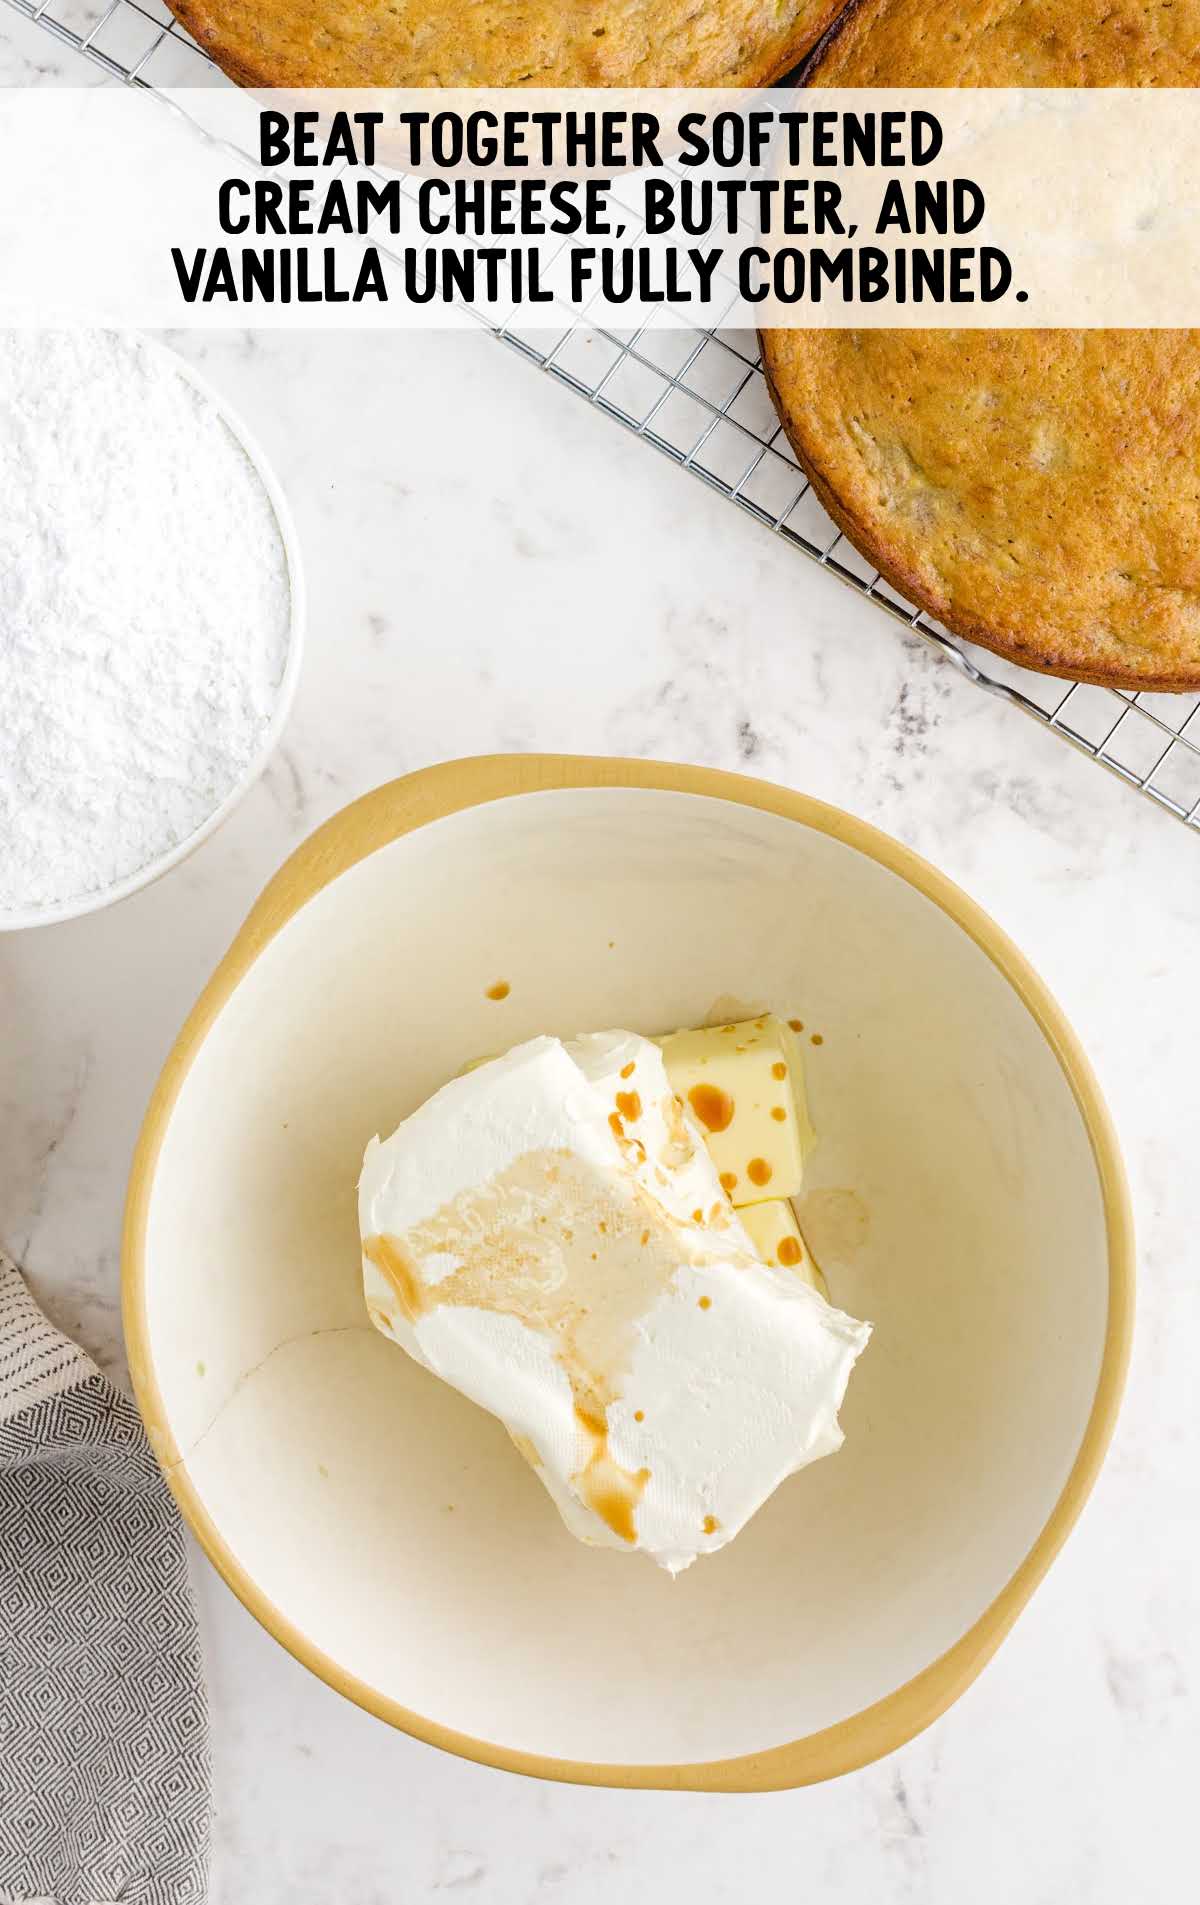 cream cheese, butter, and vanilla in a bowl